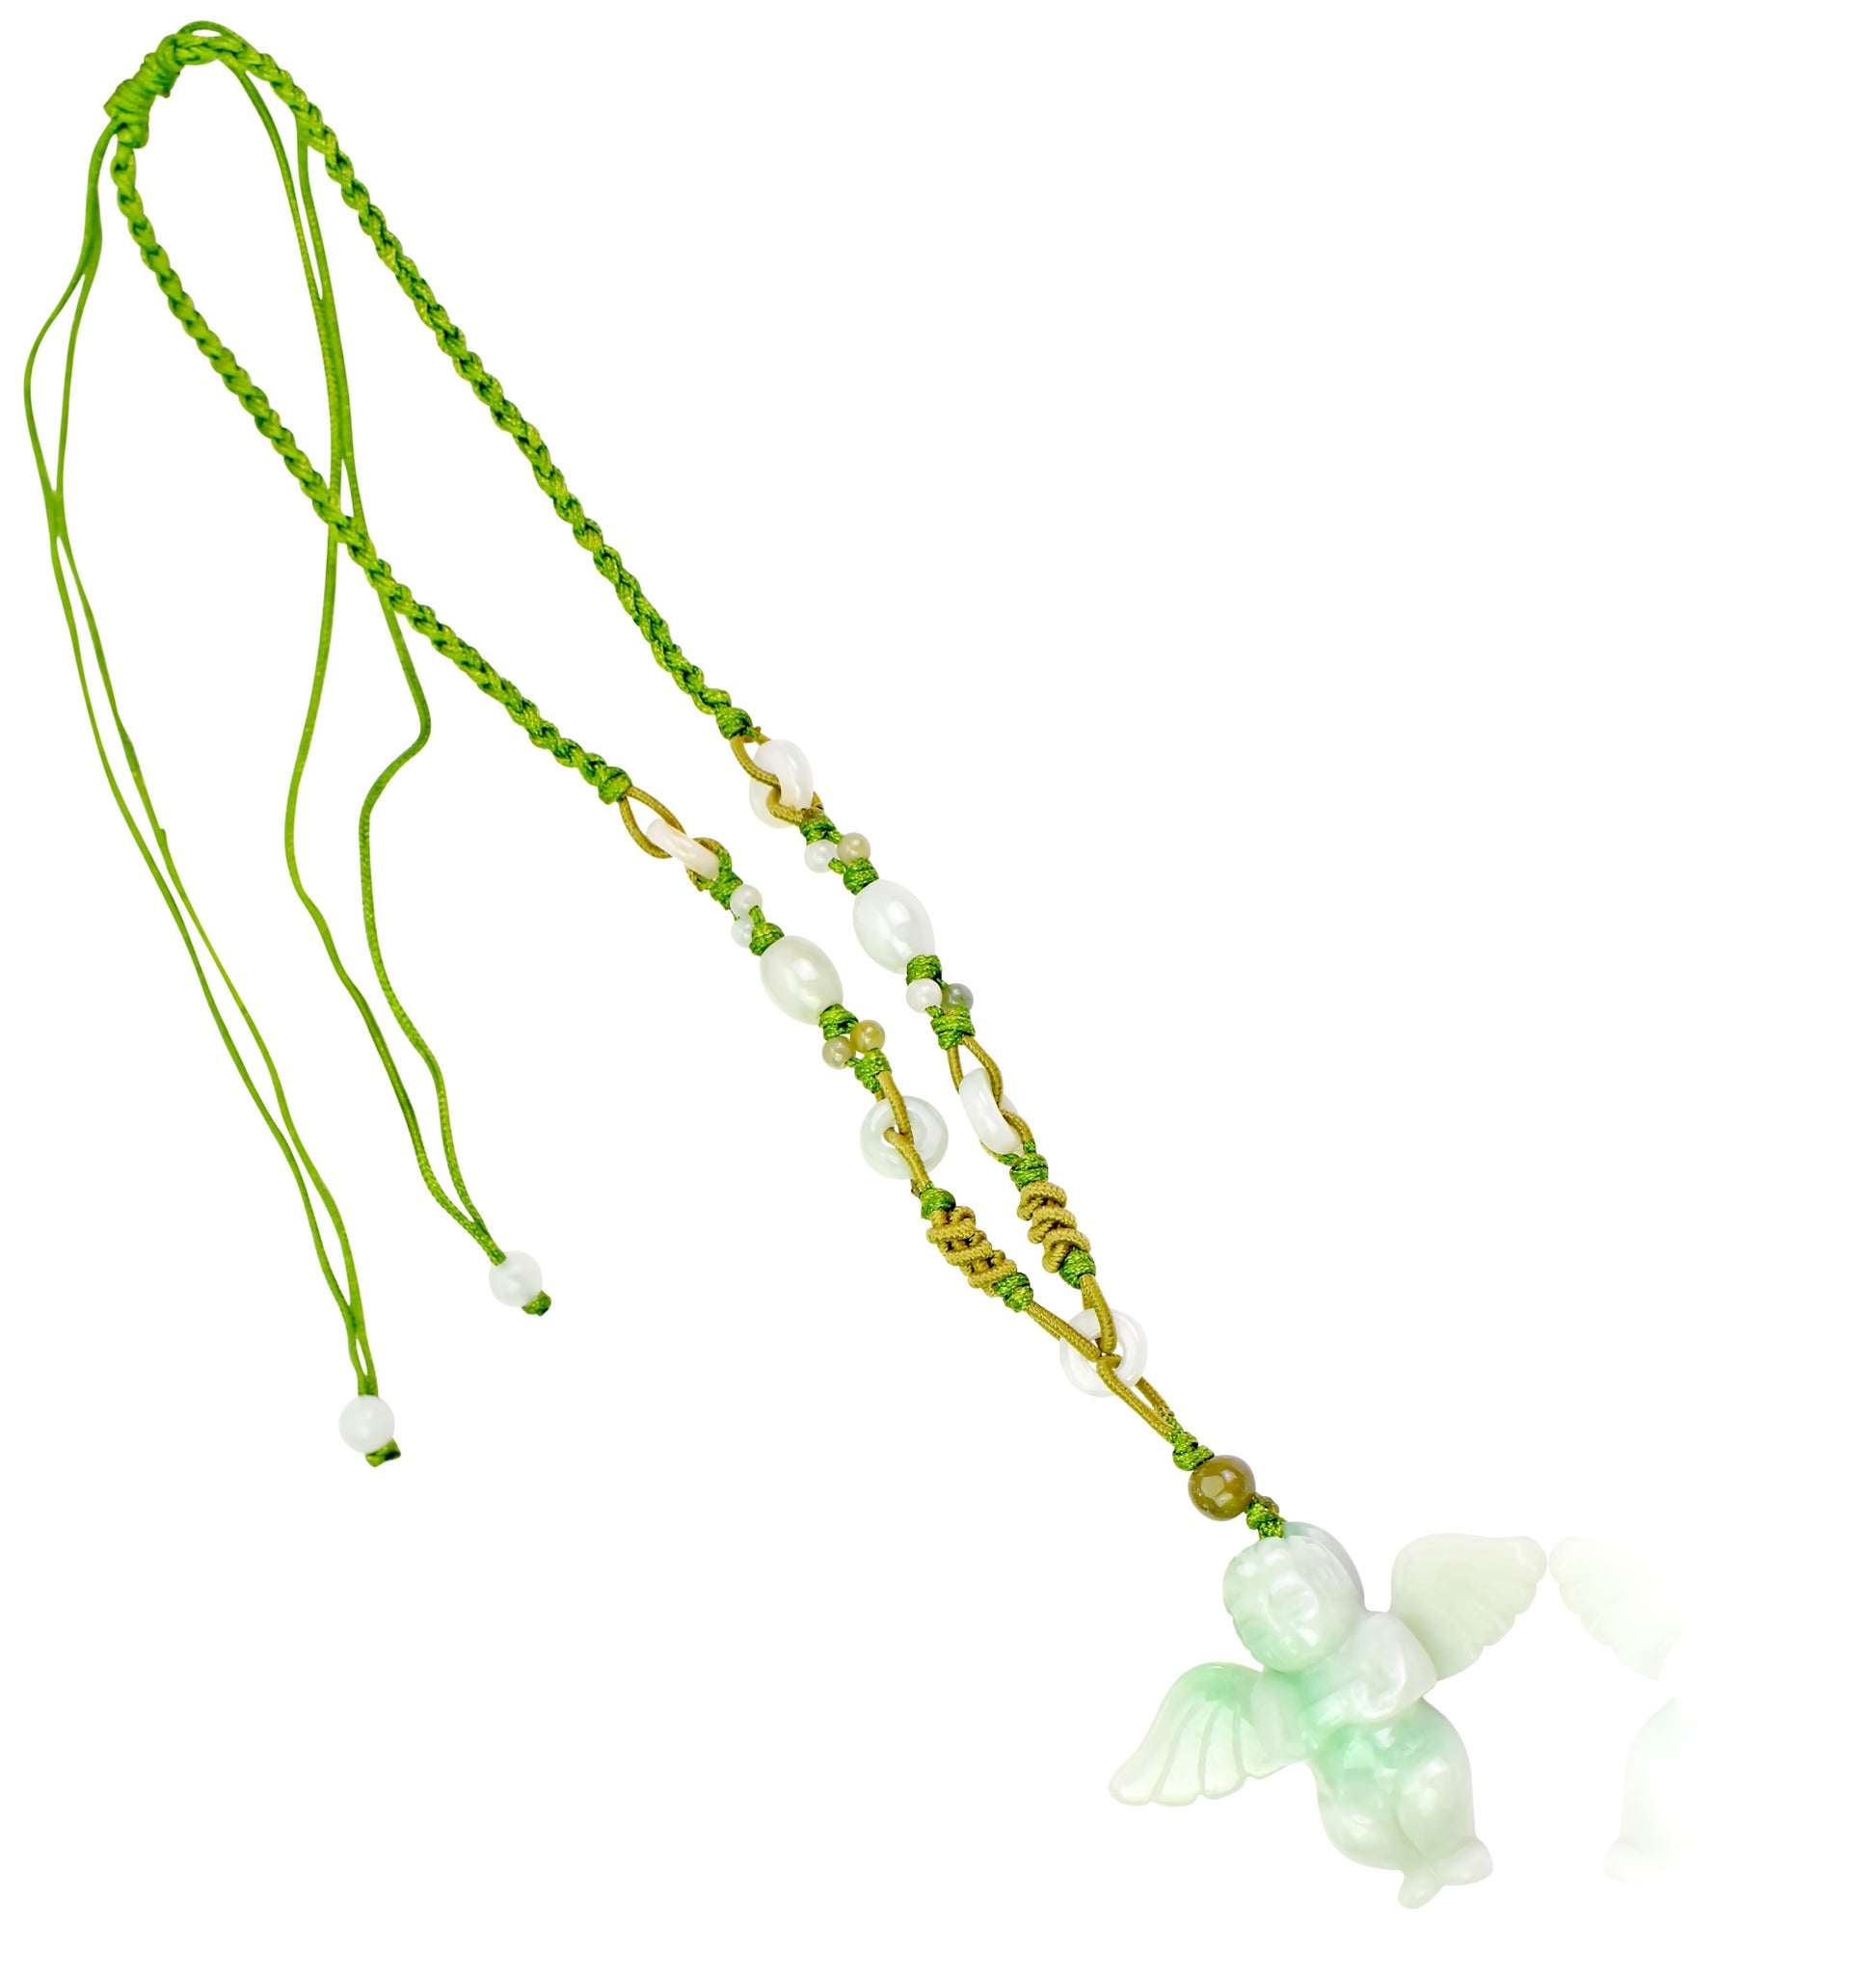 Add a Little Charm to Your Look with Angel Boy Handmade Jade Necklace